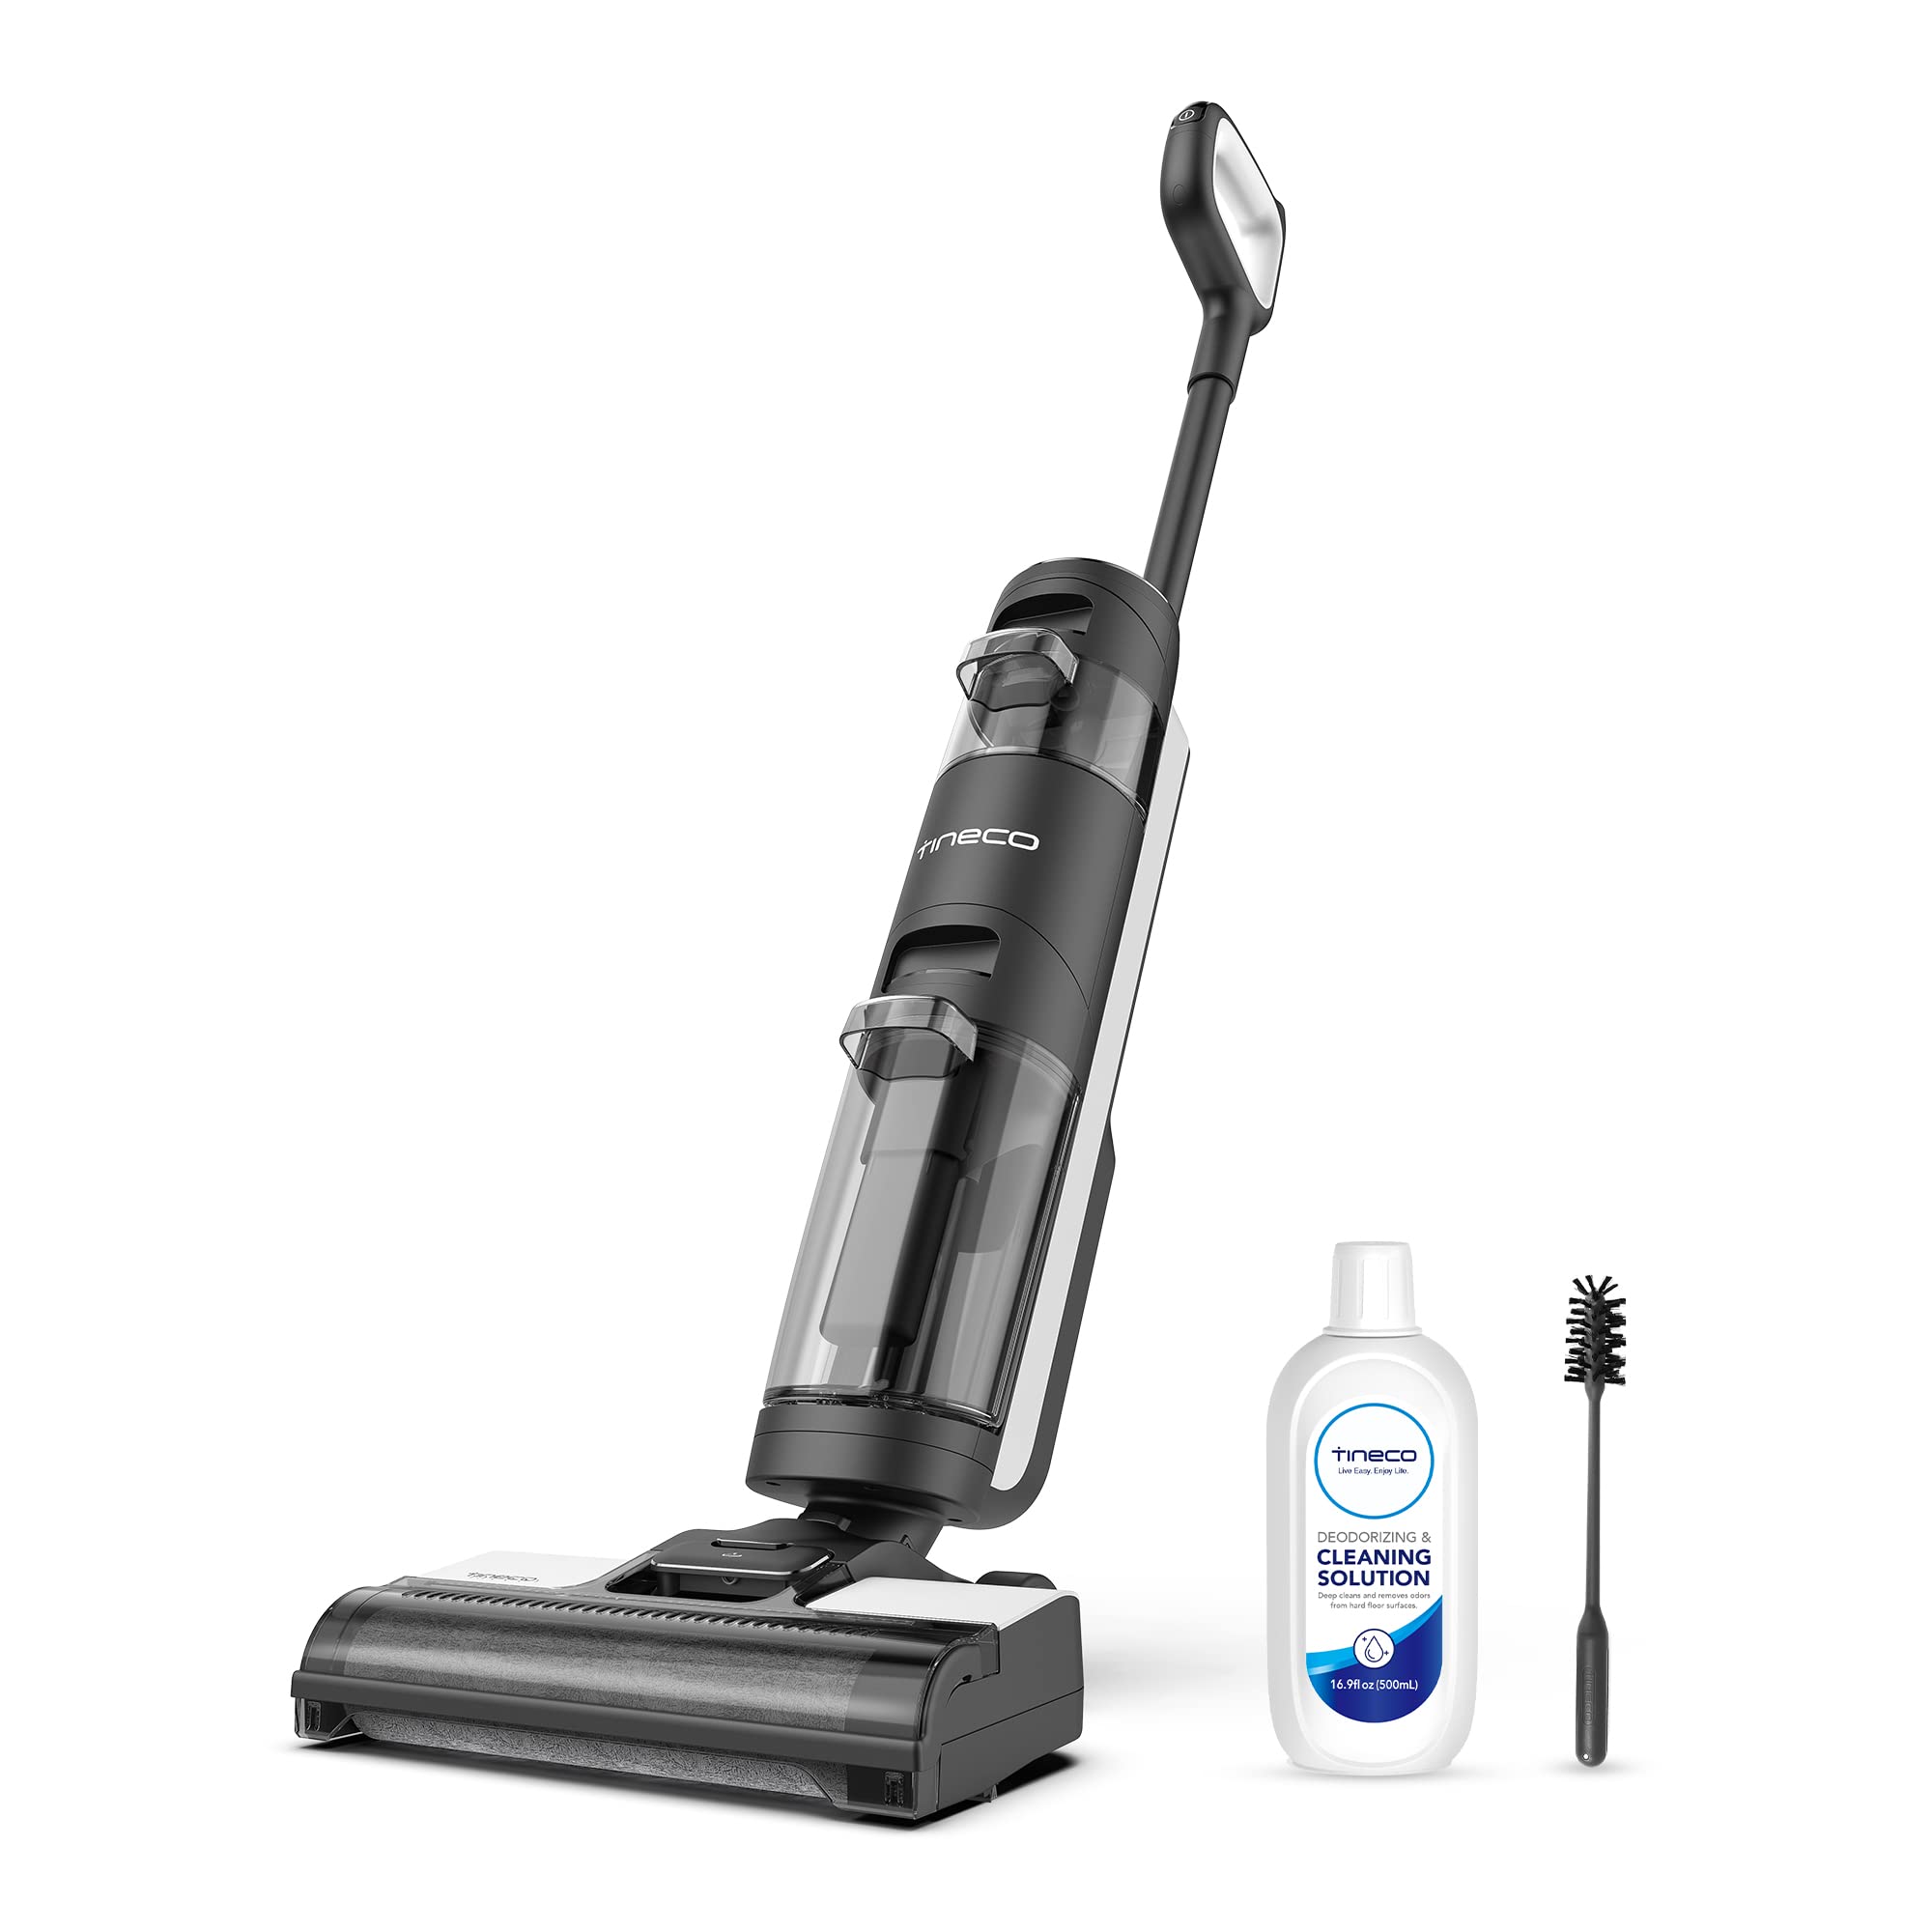 Tineco Floor ONE S3 Breeze Cordless Hardwood Floors Cleaner free shipping with prime $239.85